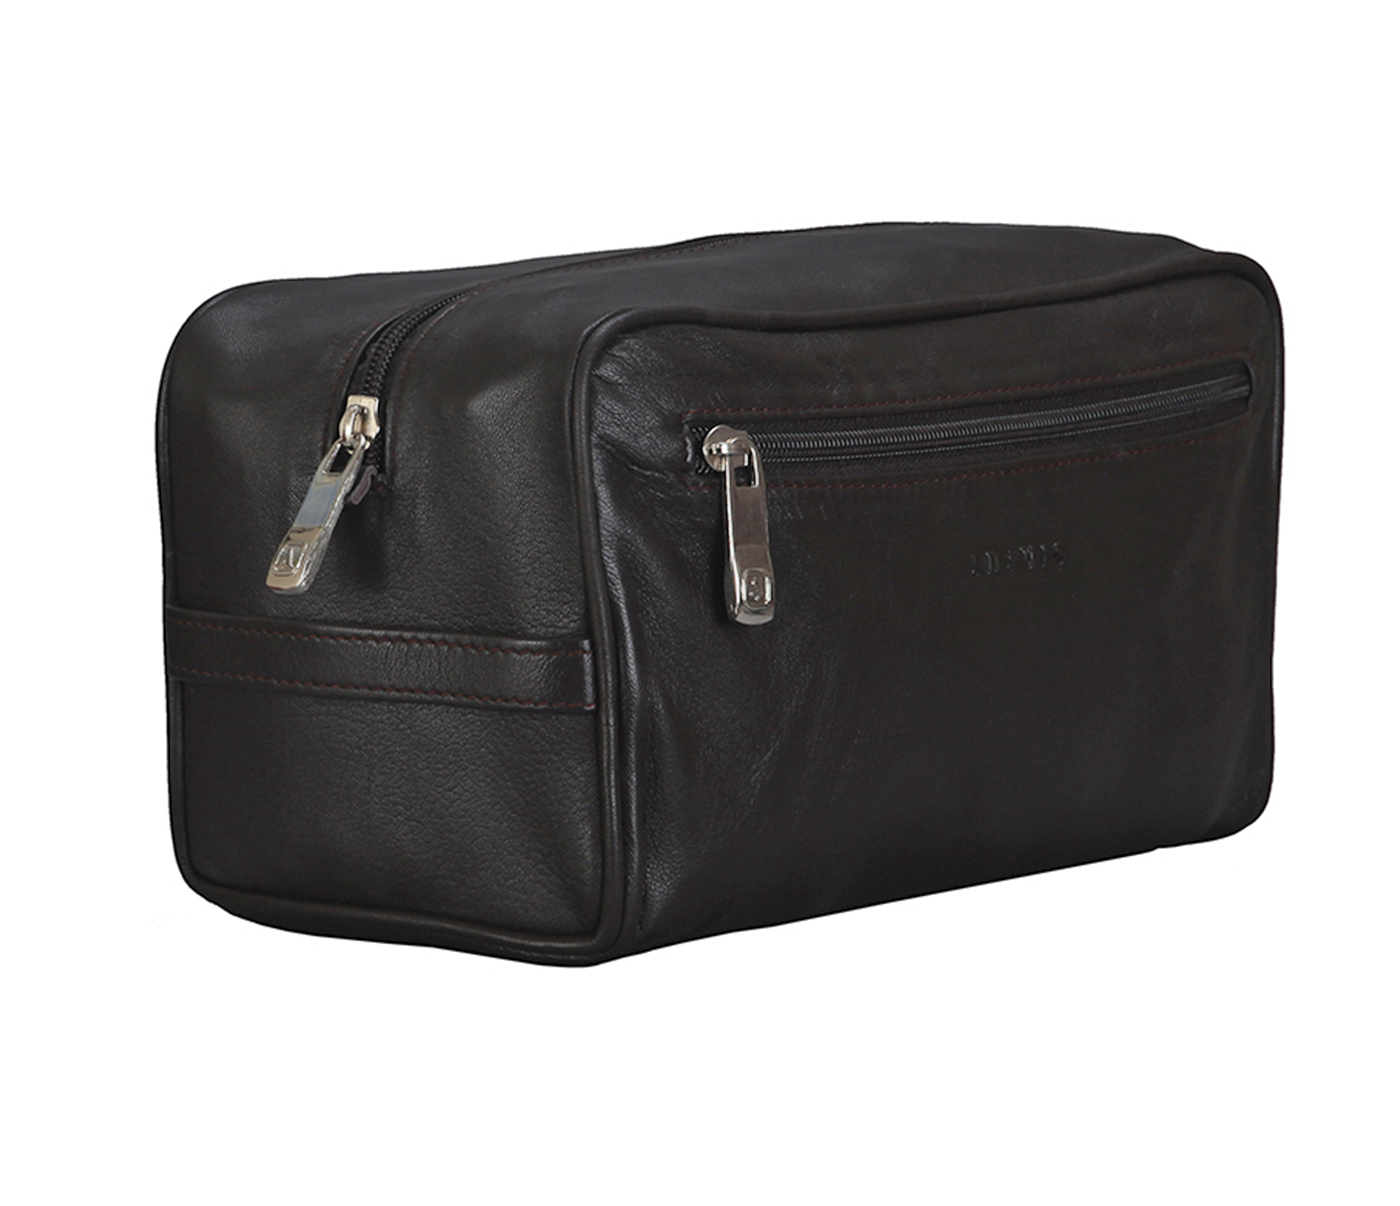 Travel Essential--Unisex Wash & Toiletry travel Bag in Genuine Leather - Brown